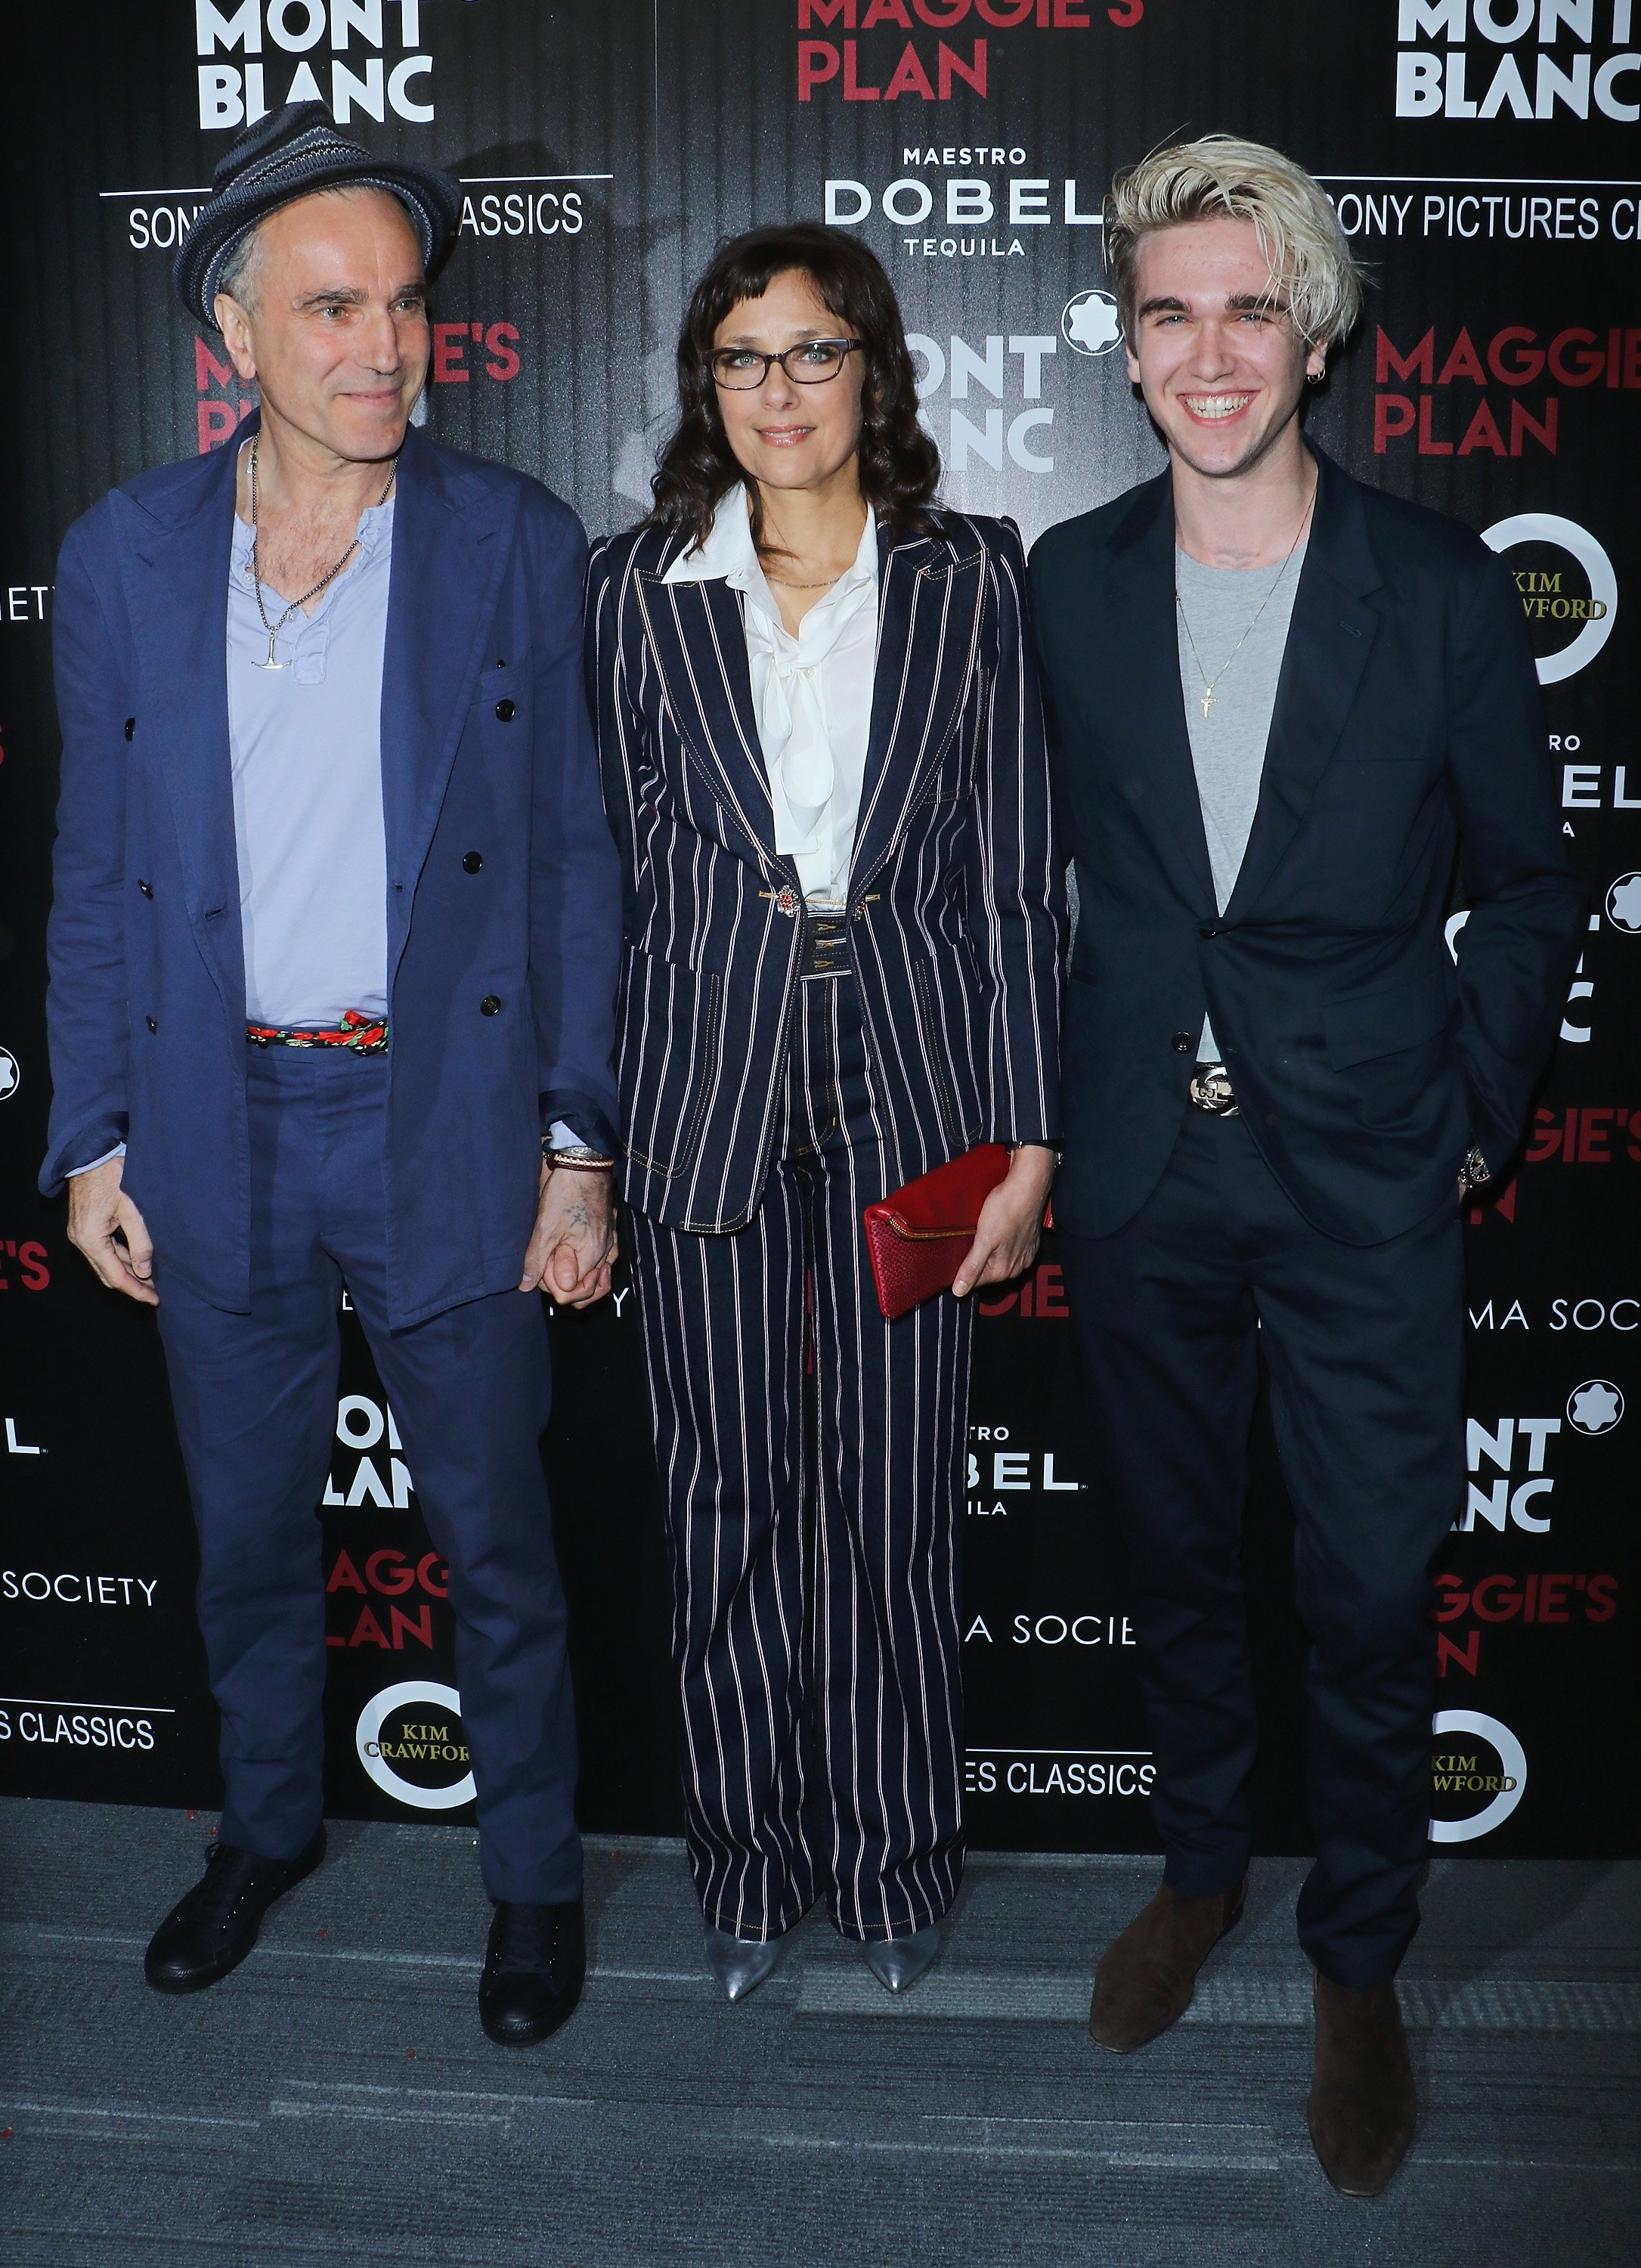  Daniel Day-Lewis with his son Gabriel-Kane Day-Lewis and Rebecca Miller at the screening of Sony Pictures Classics' "Maggie's Plan" on May 5, 2016, in New York City. | Source: Getty Images